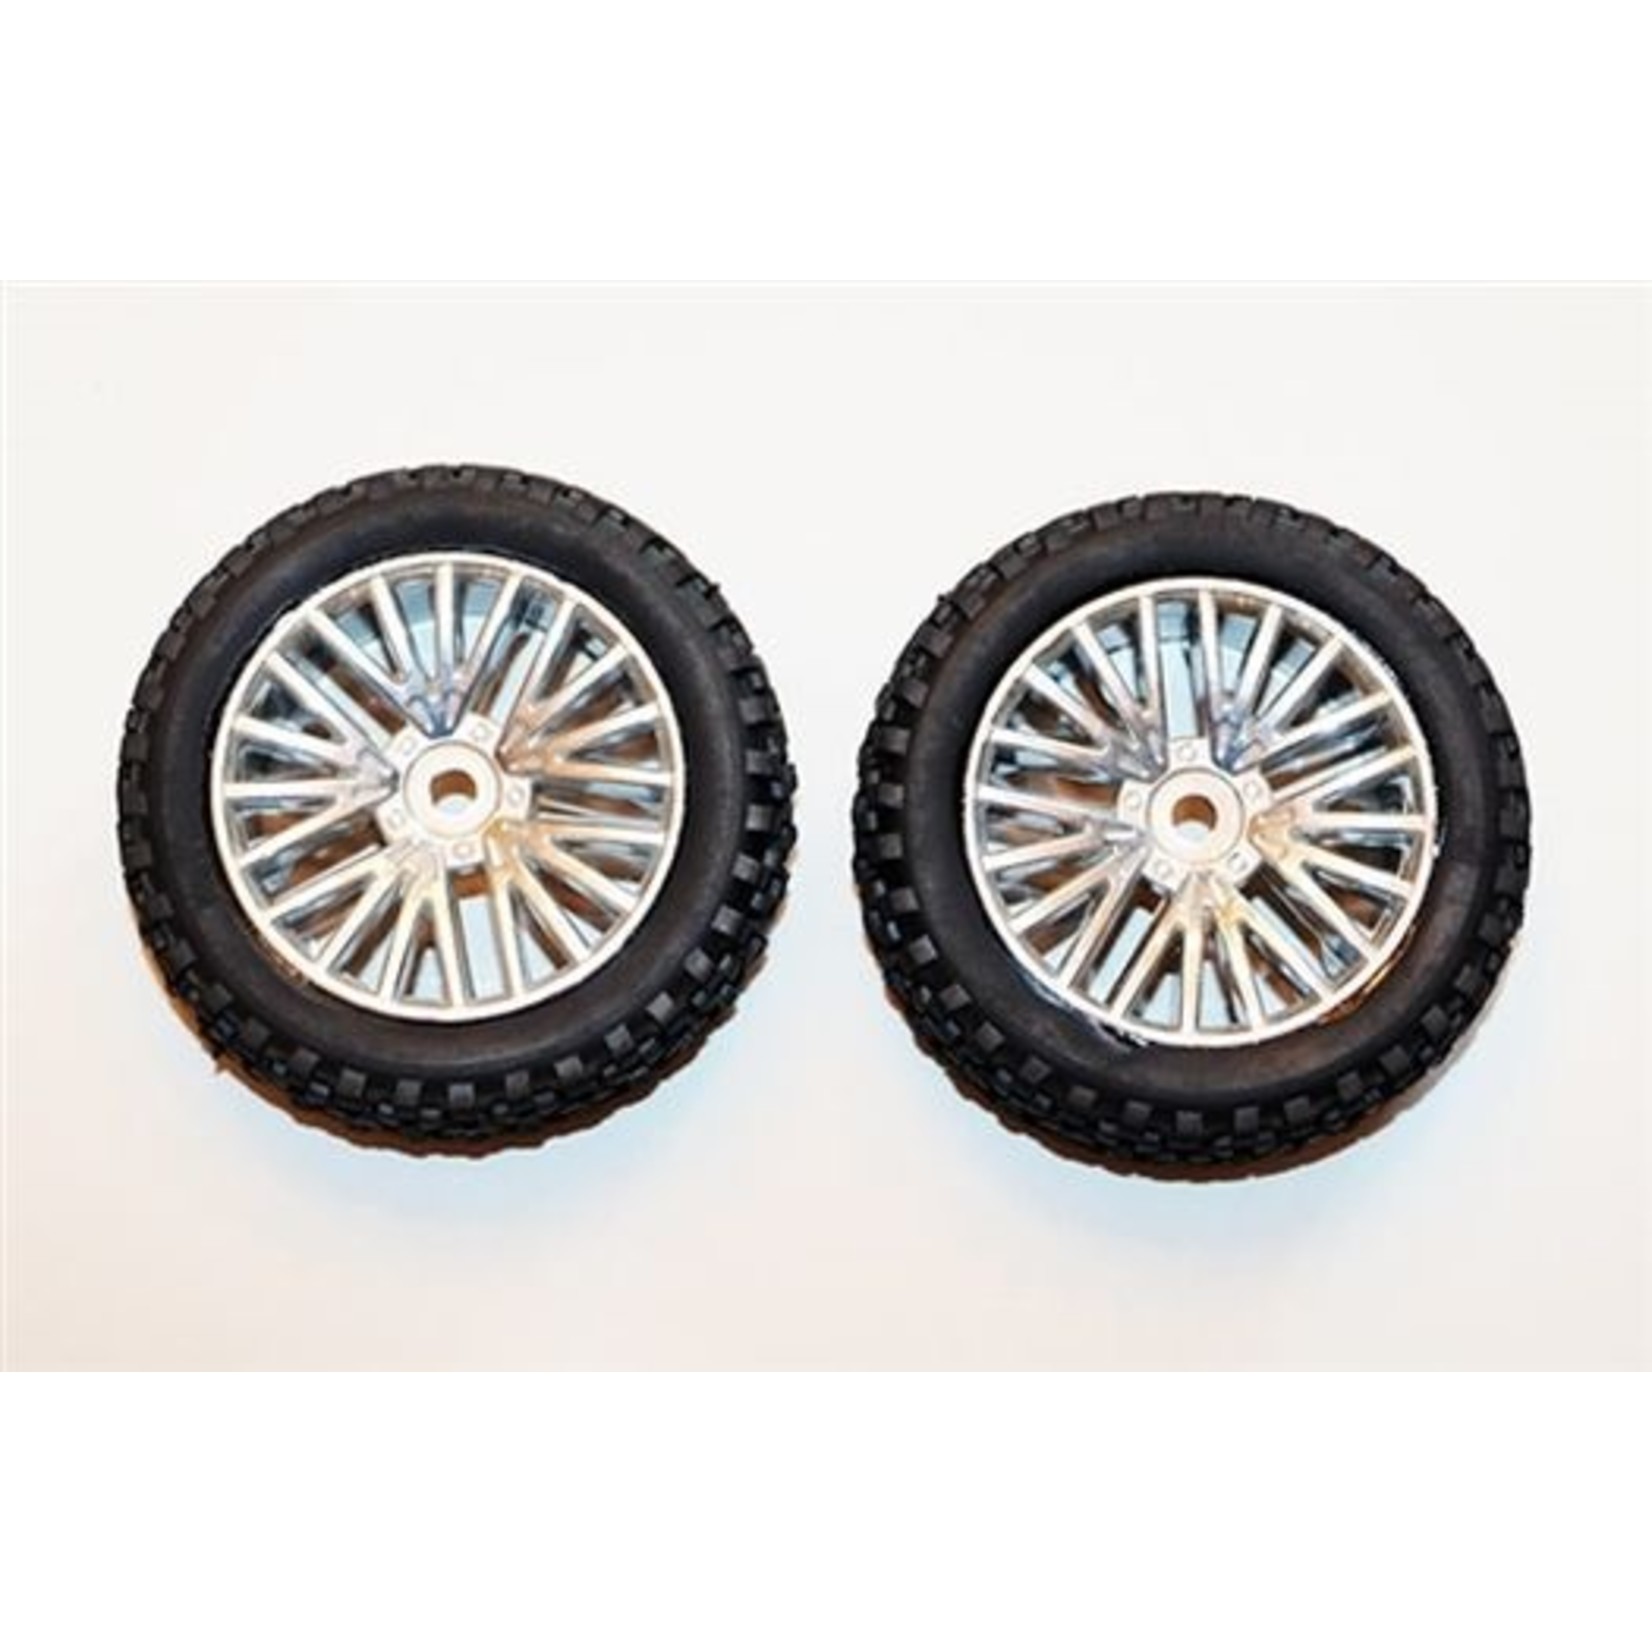 DHK Hobby Tires, Rear - Mounted on Chrome Wheels (2pcs) - Wolf 2